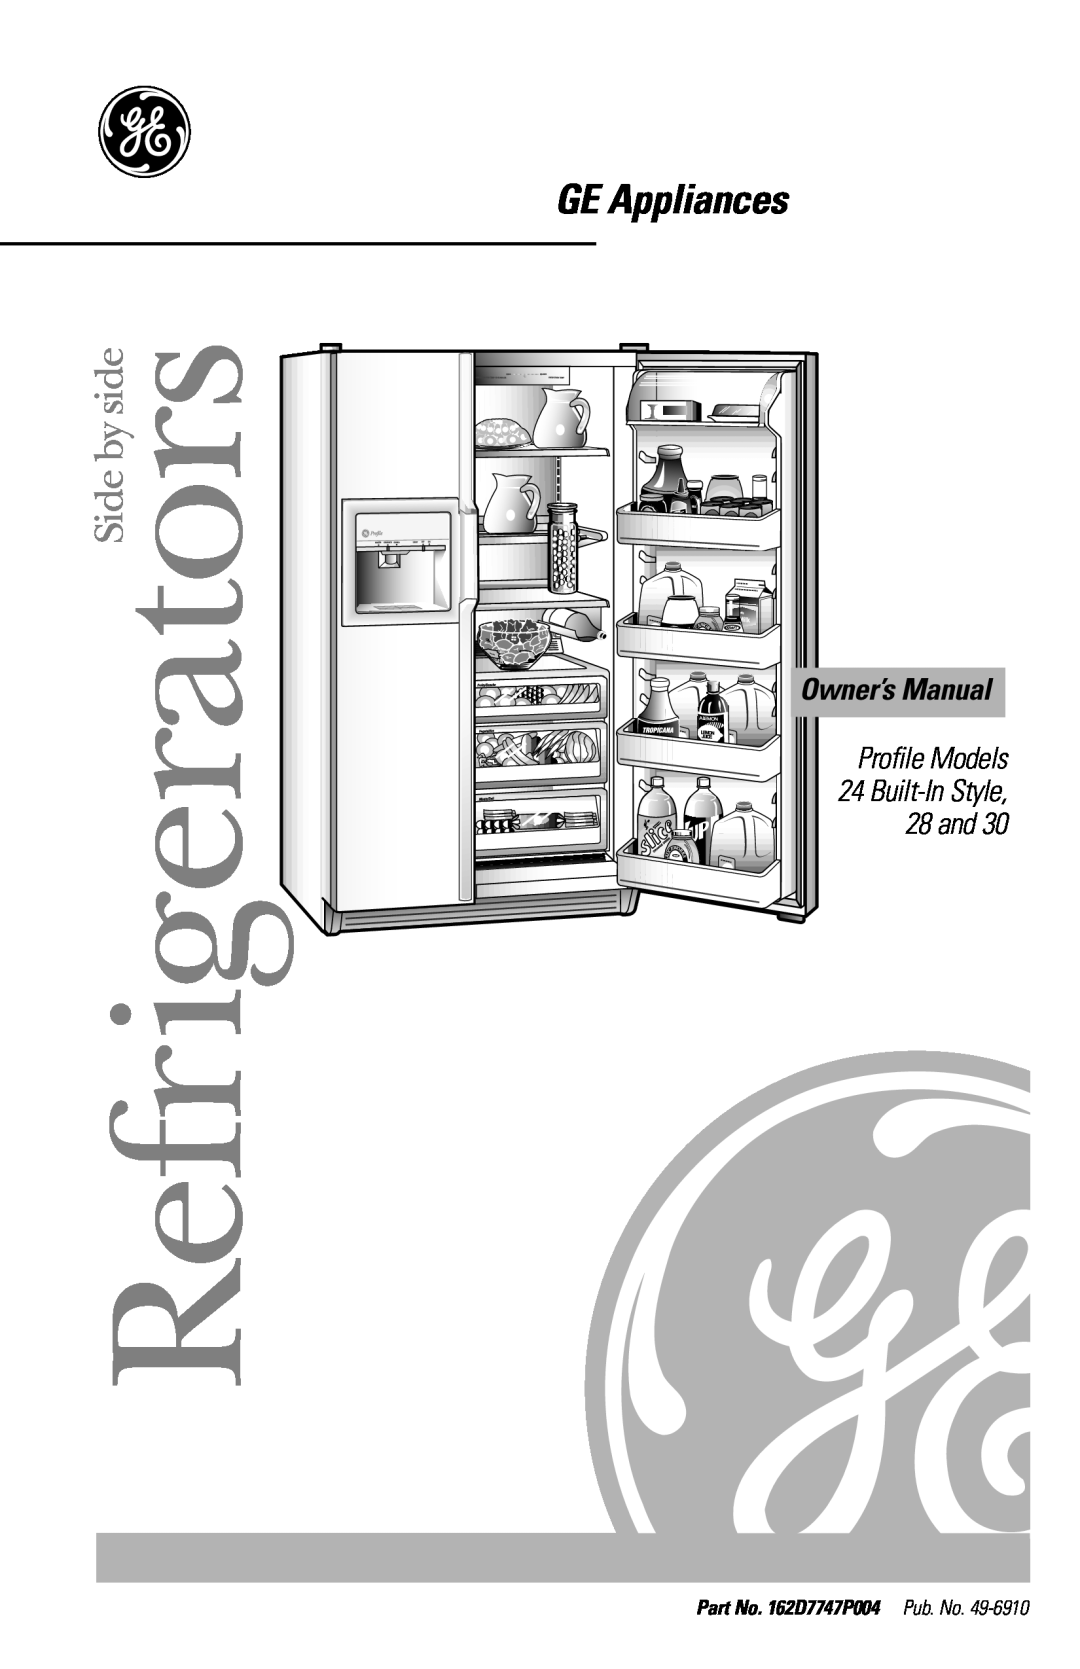 GE 28, 30 owner manual GE Appliances, Profile Models, 28 and, Built-In Style, Owner’s Manual, Refrigerators, Side by side 